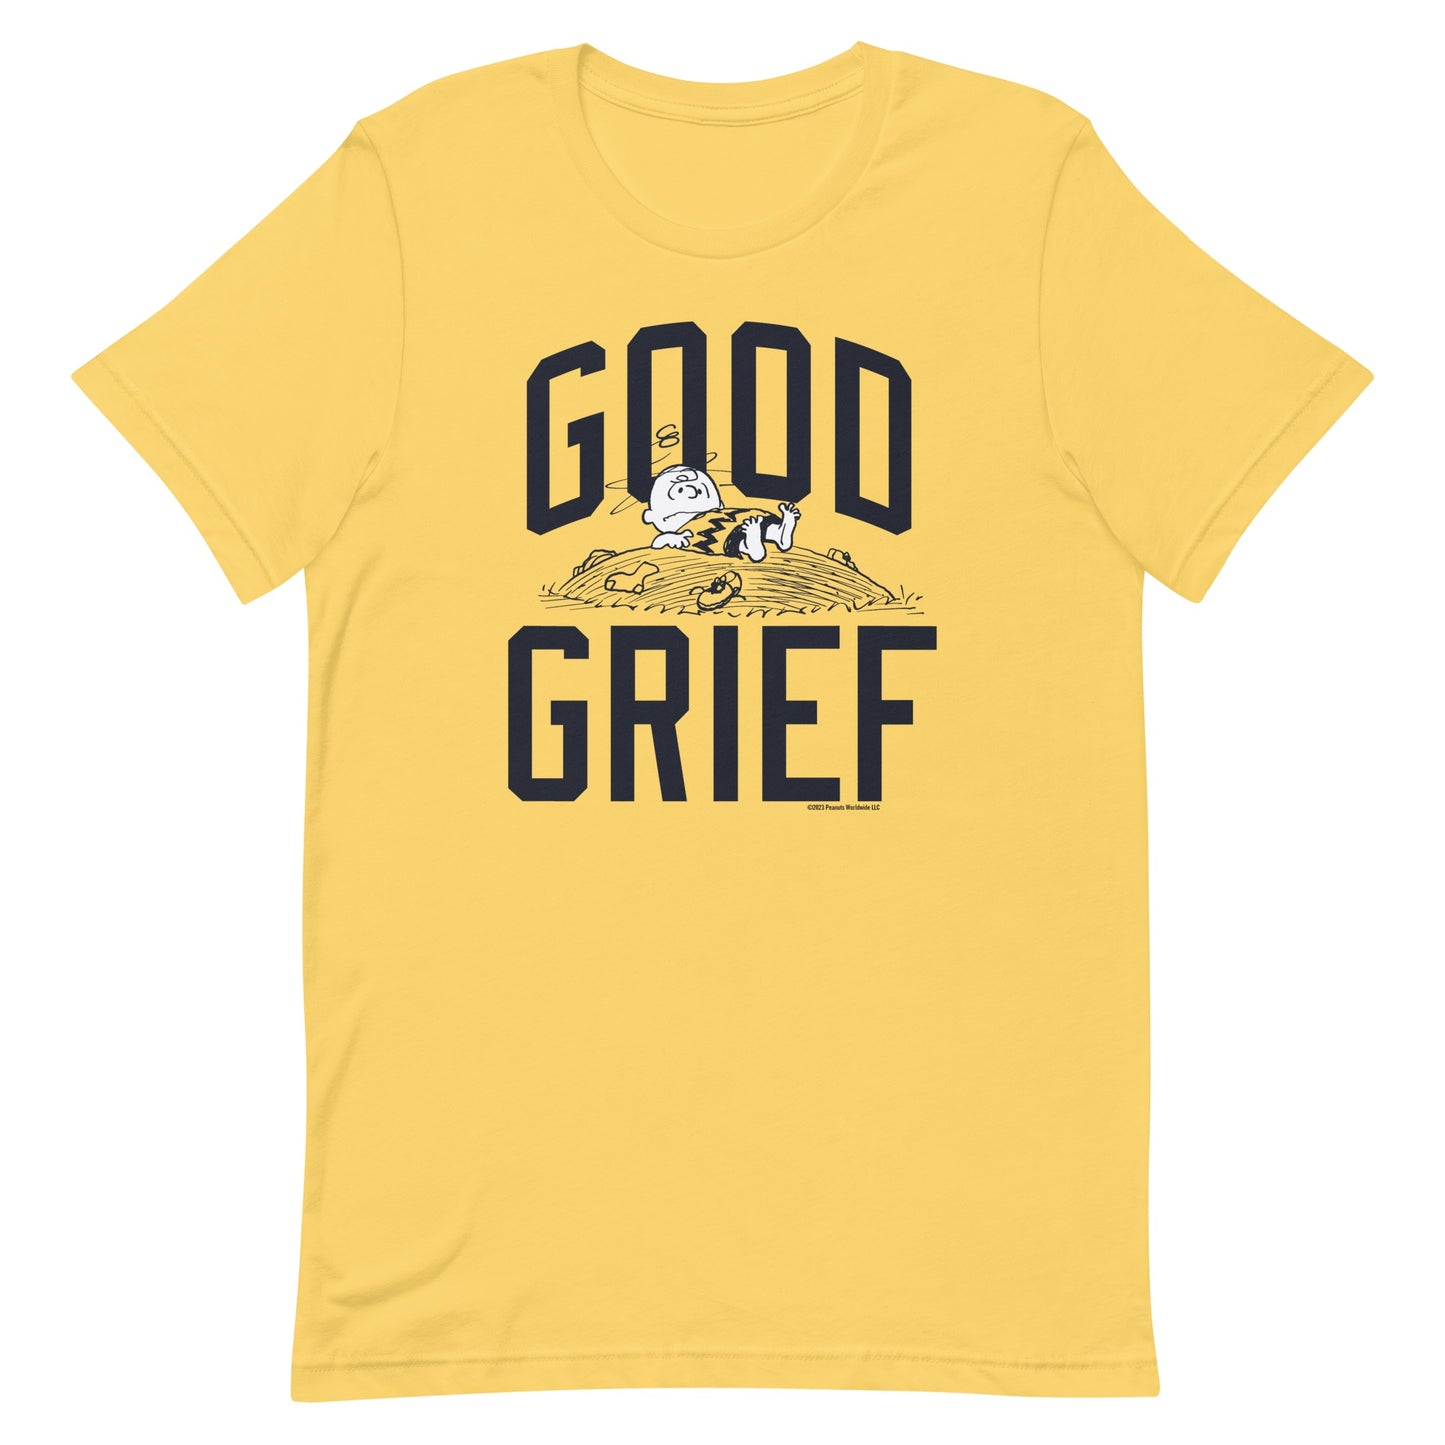 Charlie Brown Good Grief Adult T-Shirt